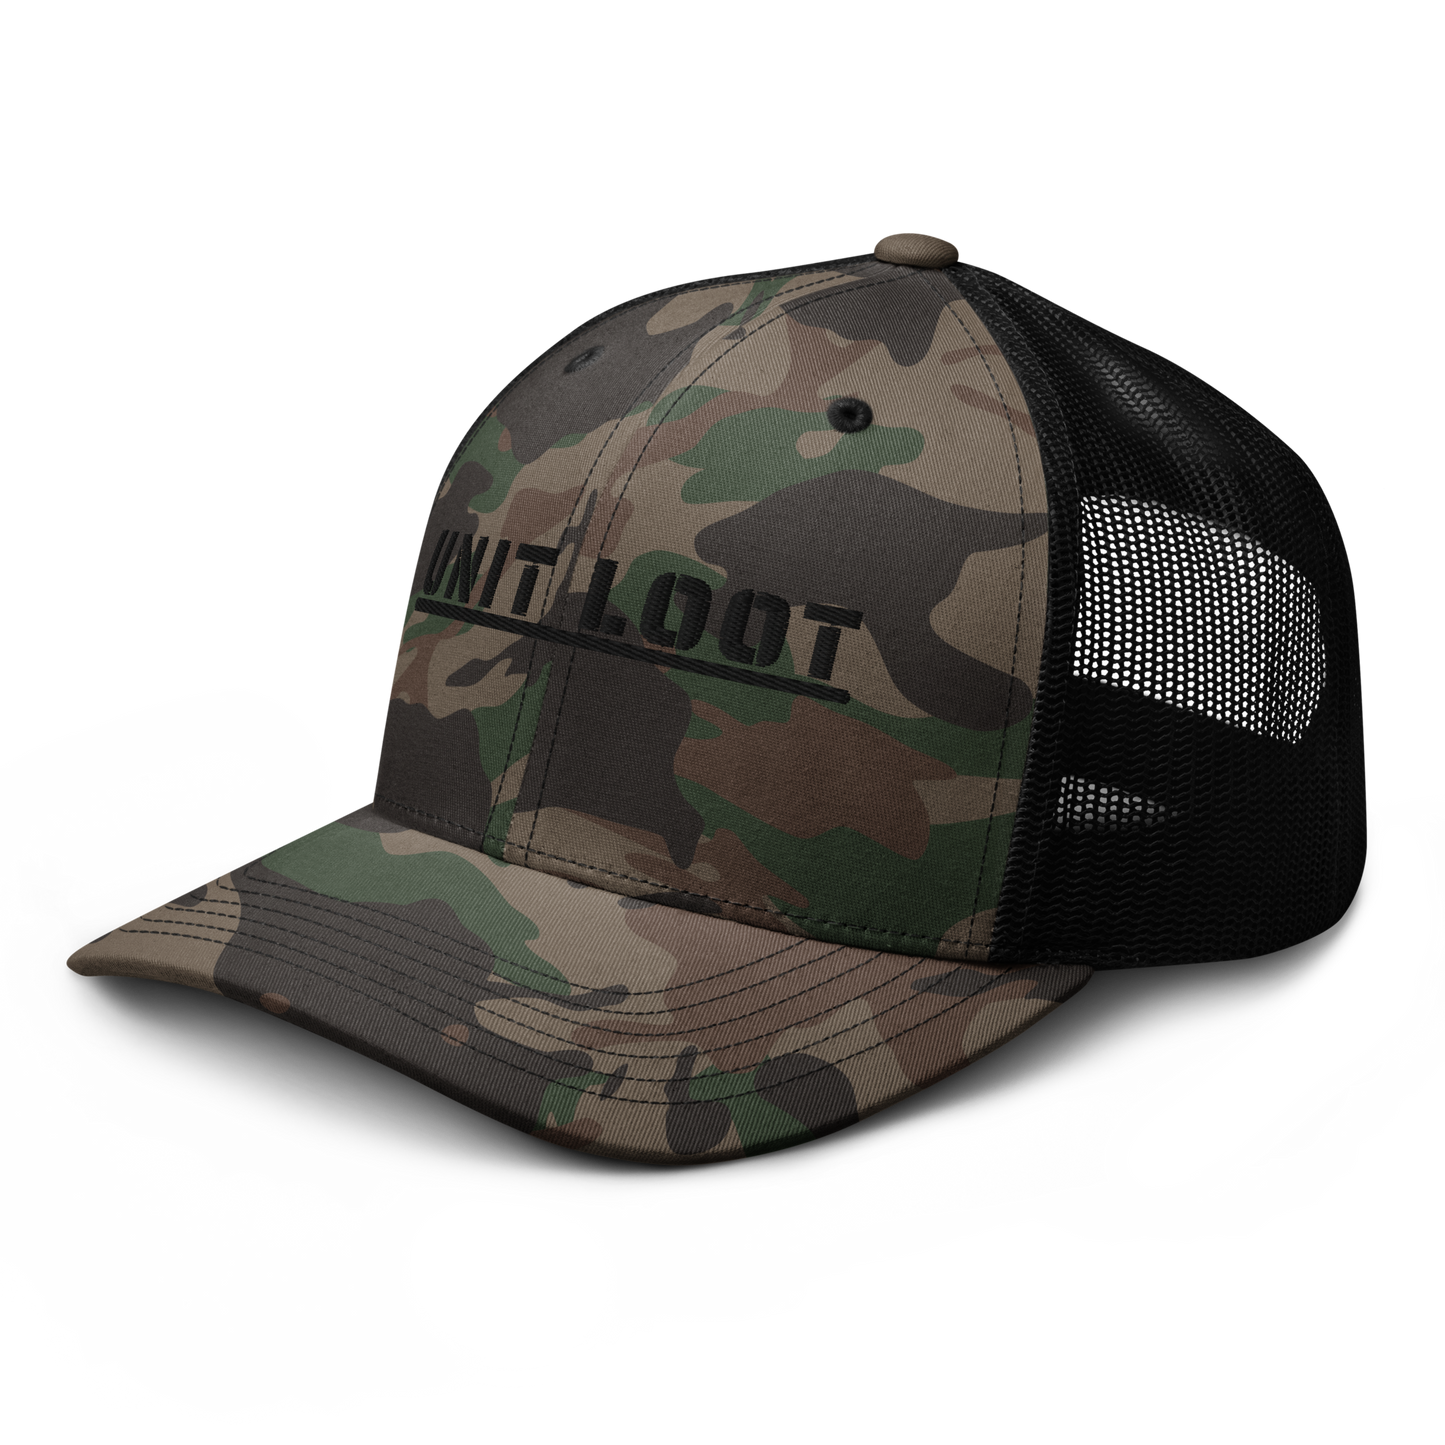 Unit Loot Branded Embroidered Camo Trucker Hat